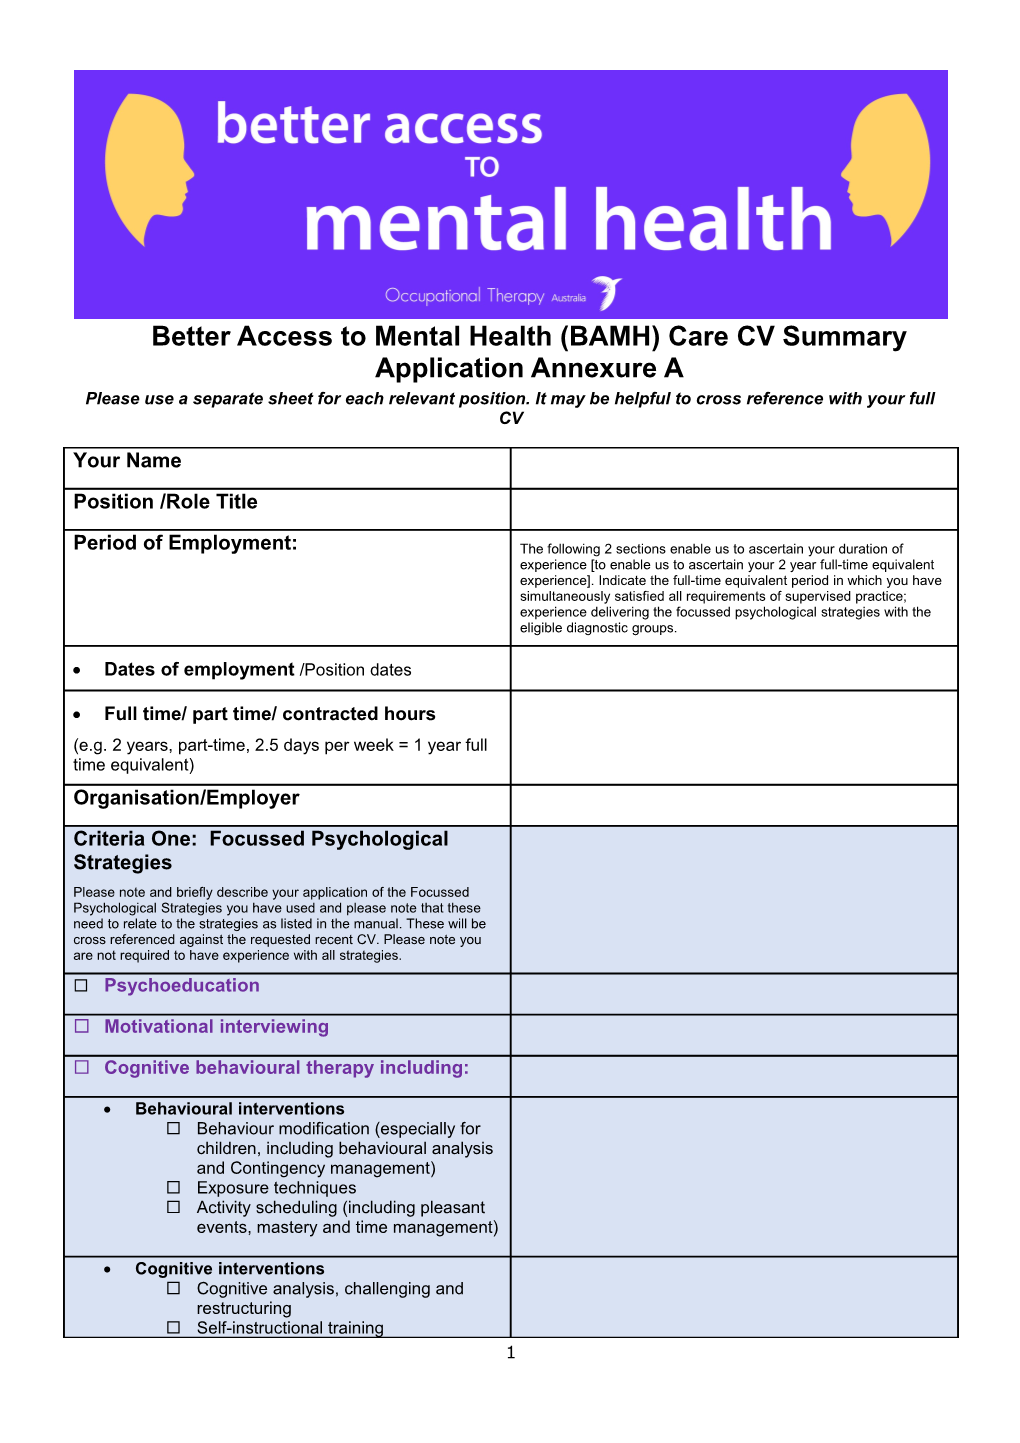 Better Access to Mental Health Care Application